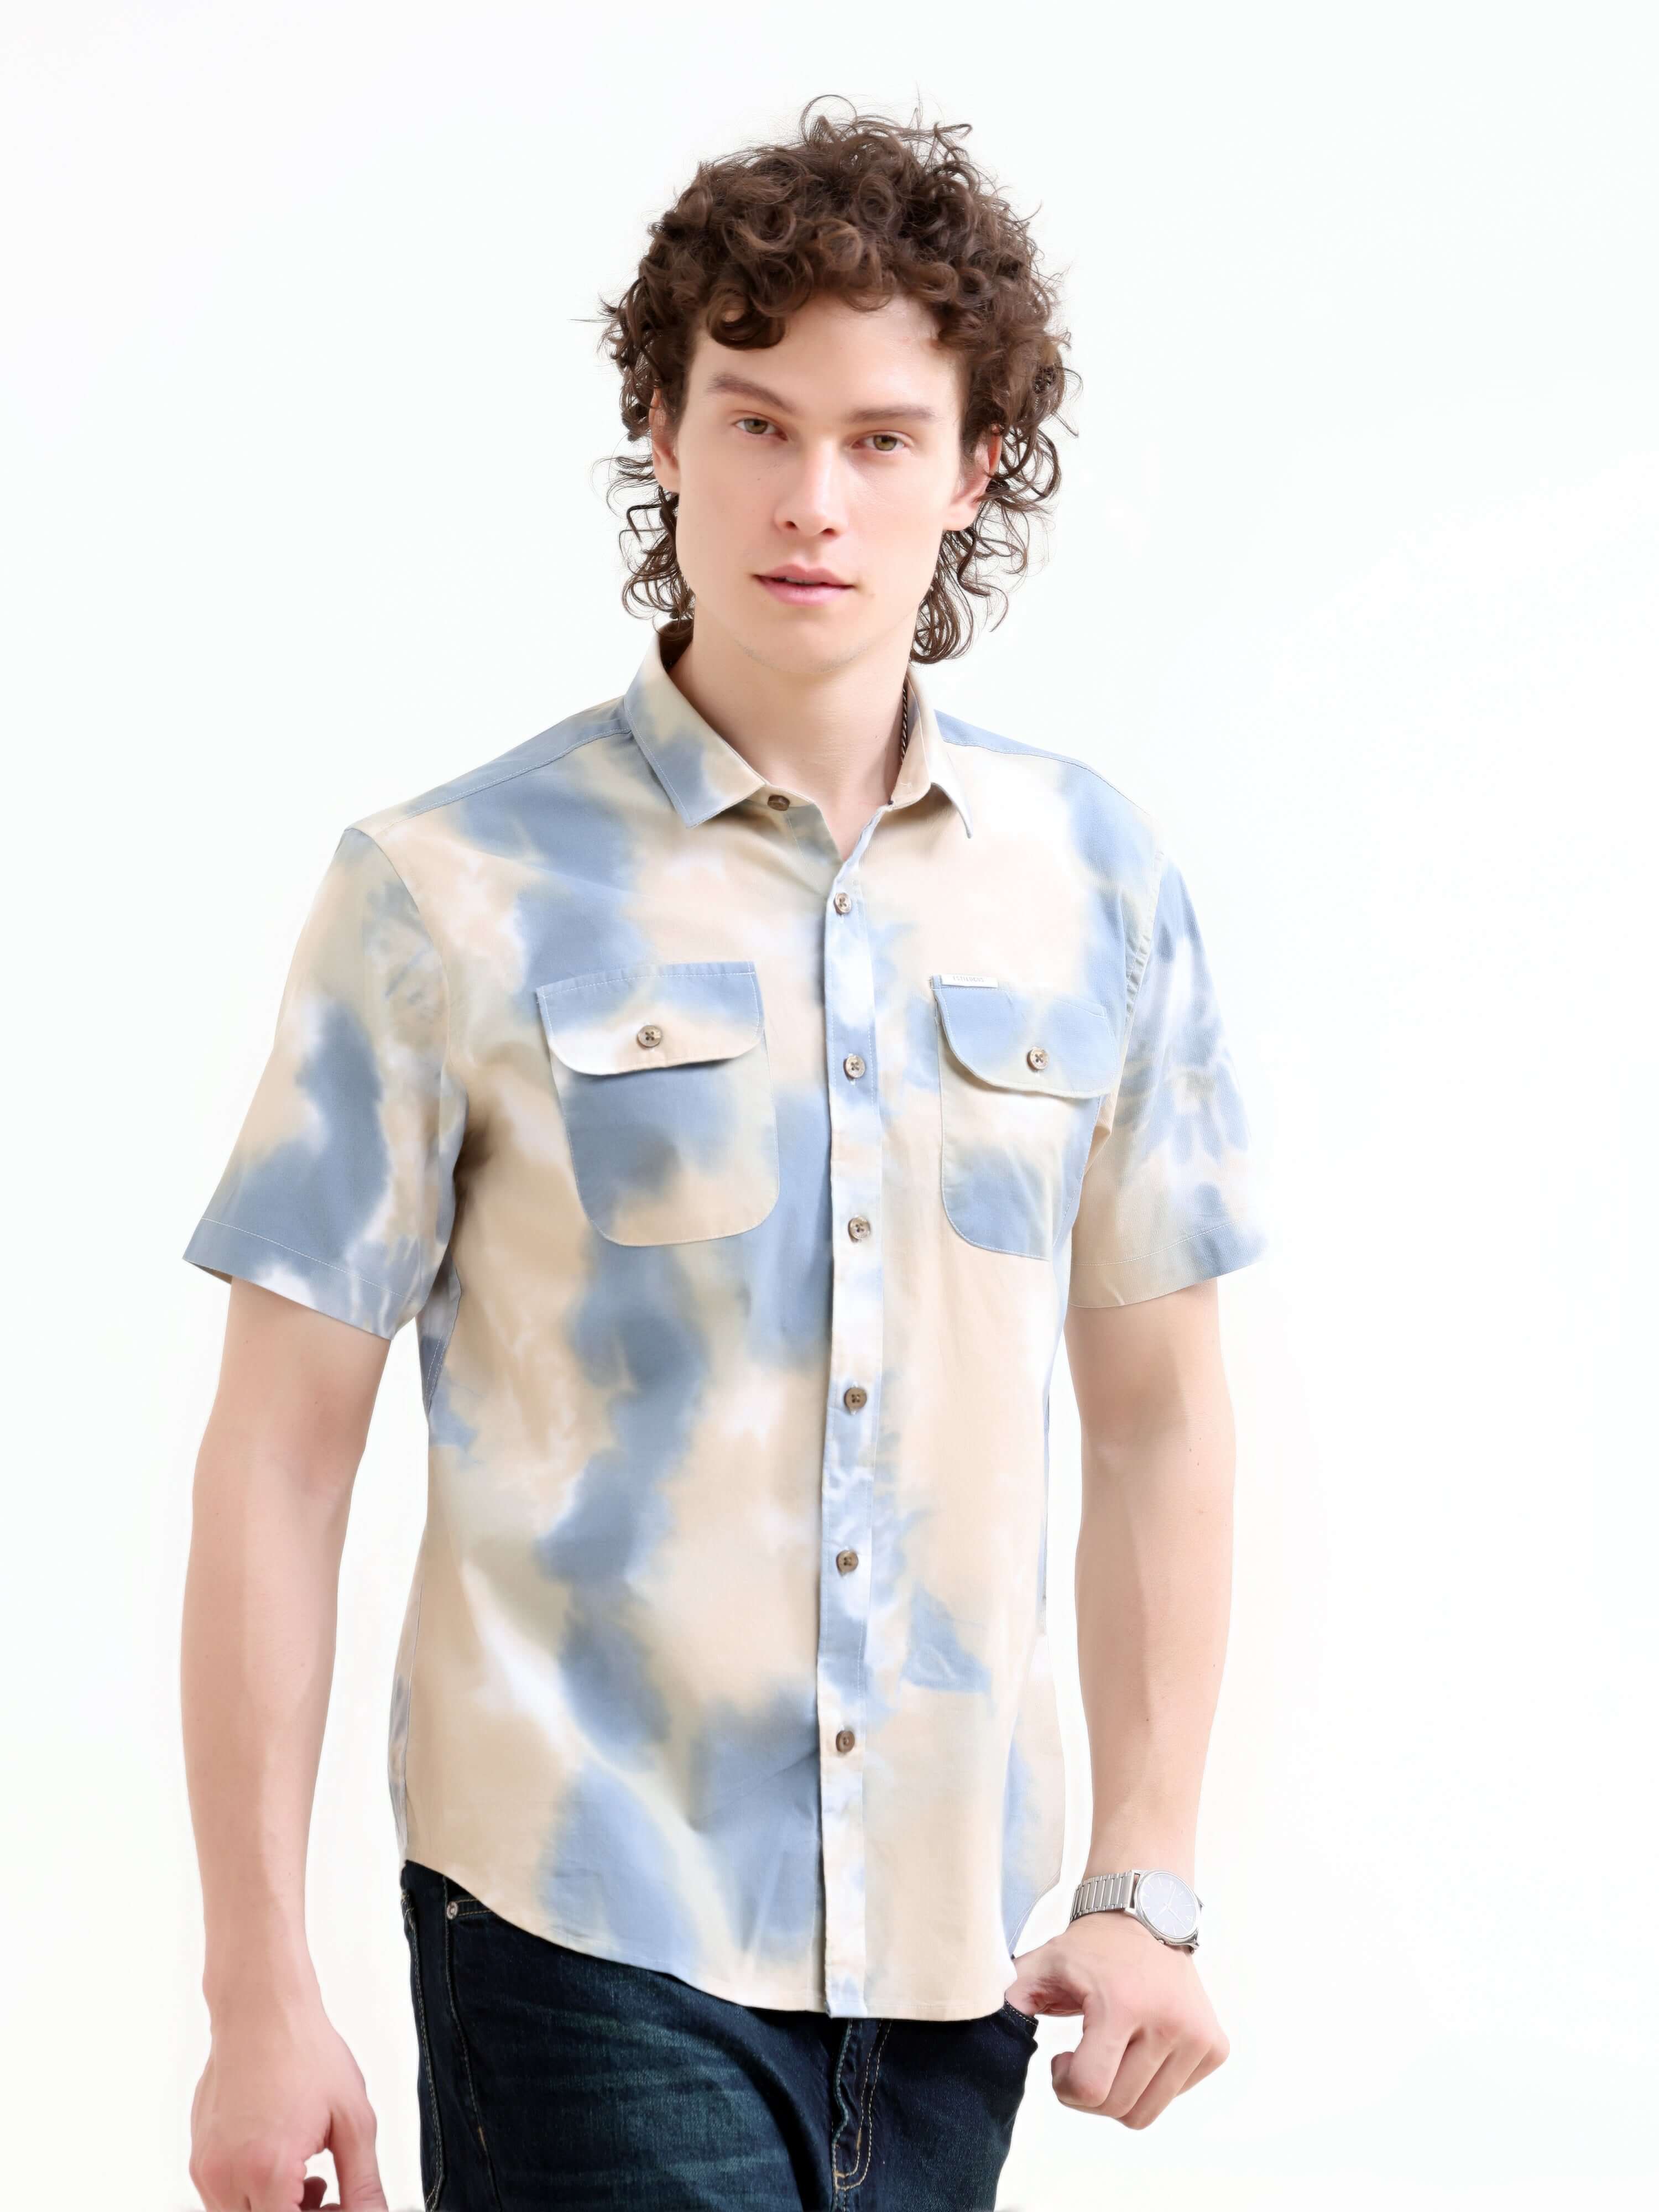 Pastel Blue Watercolor Print Shirt - Men's Casual New shop online at Estilocus. Elevate your summer style with our pasty blue watercolor shirt. Perfect fit for a vibrant casual look. Shop the new arrival now!